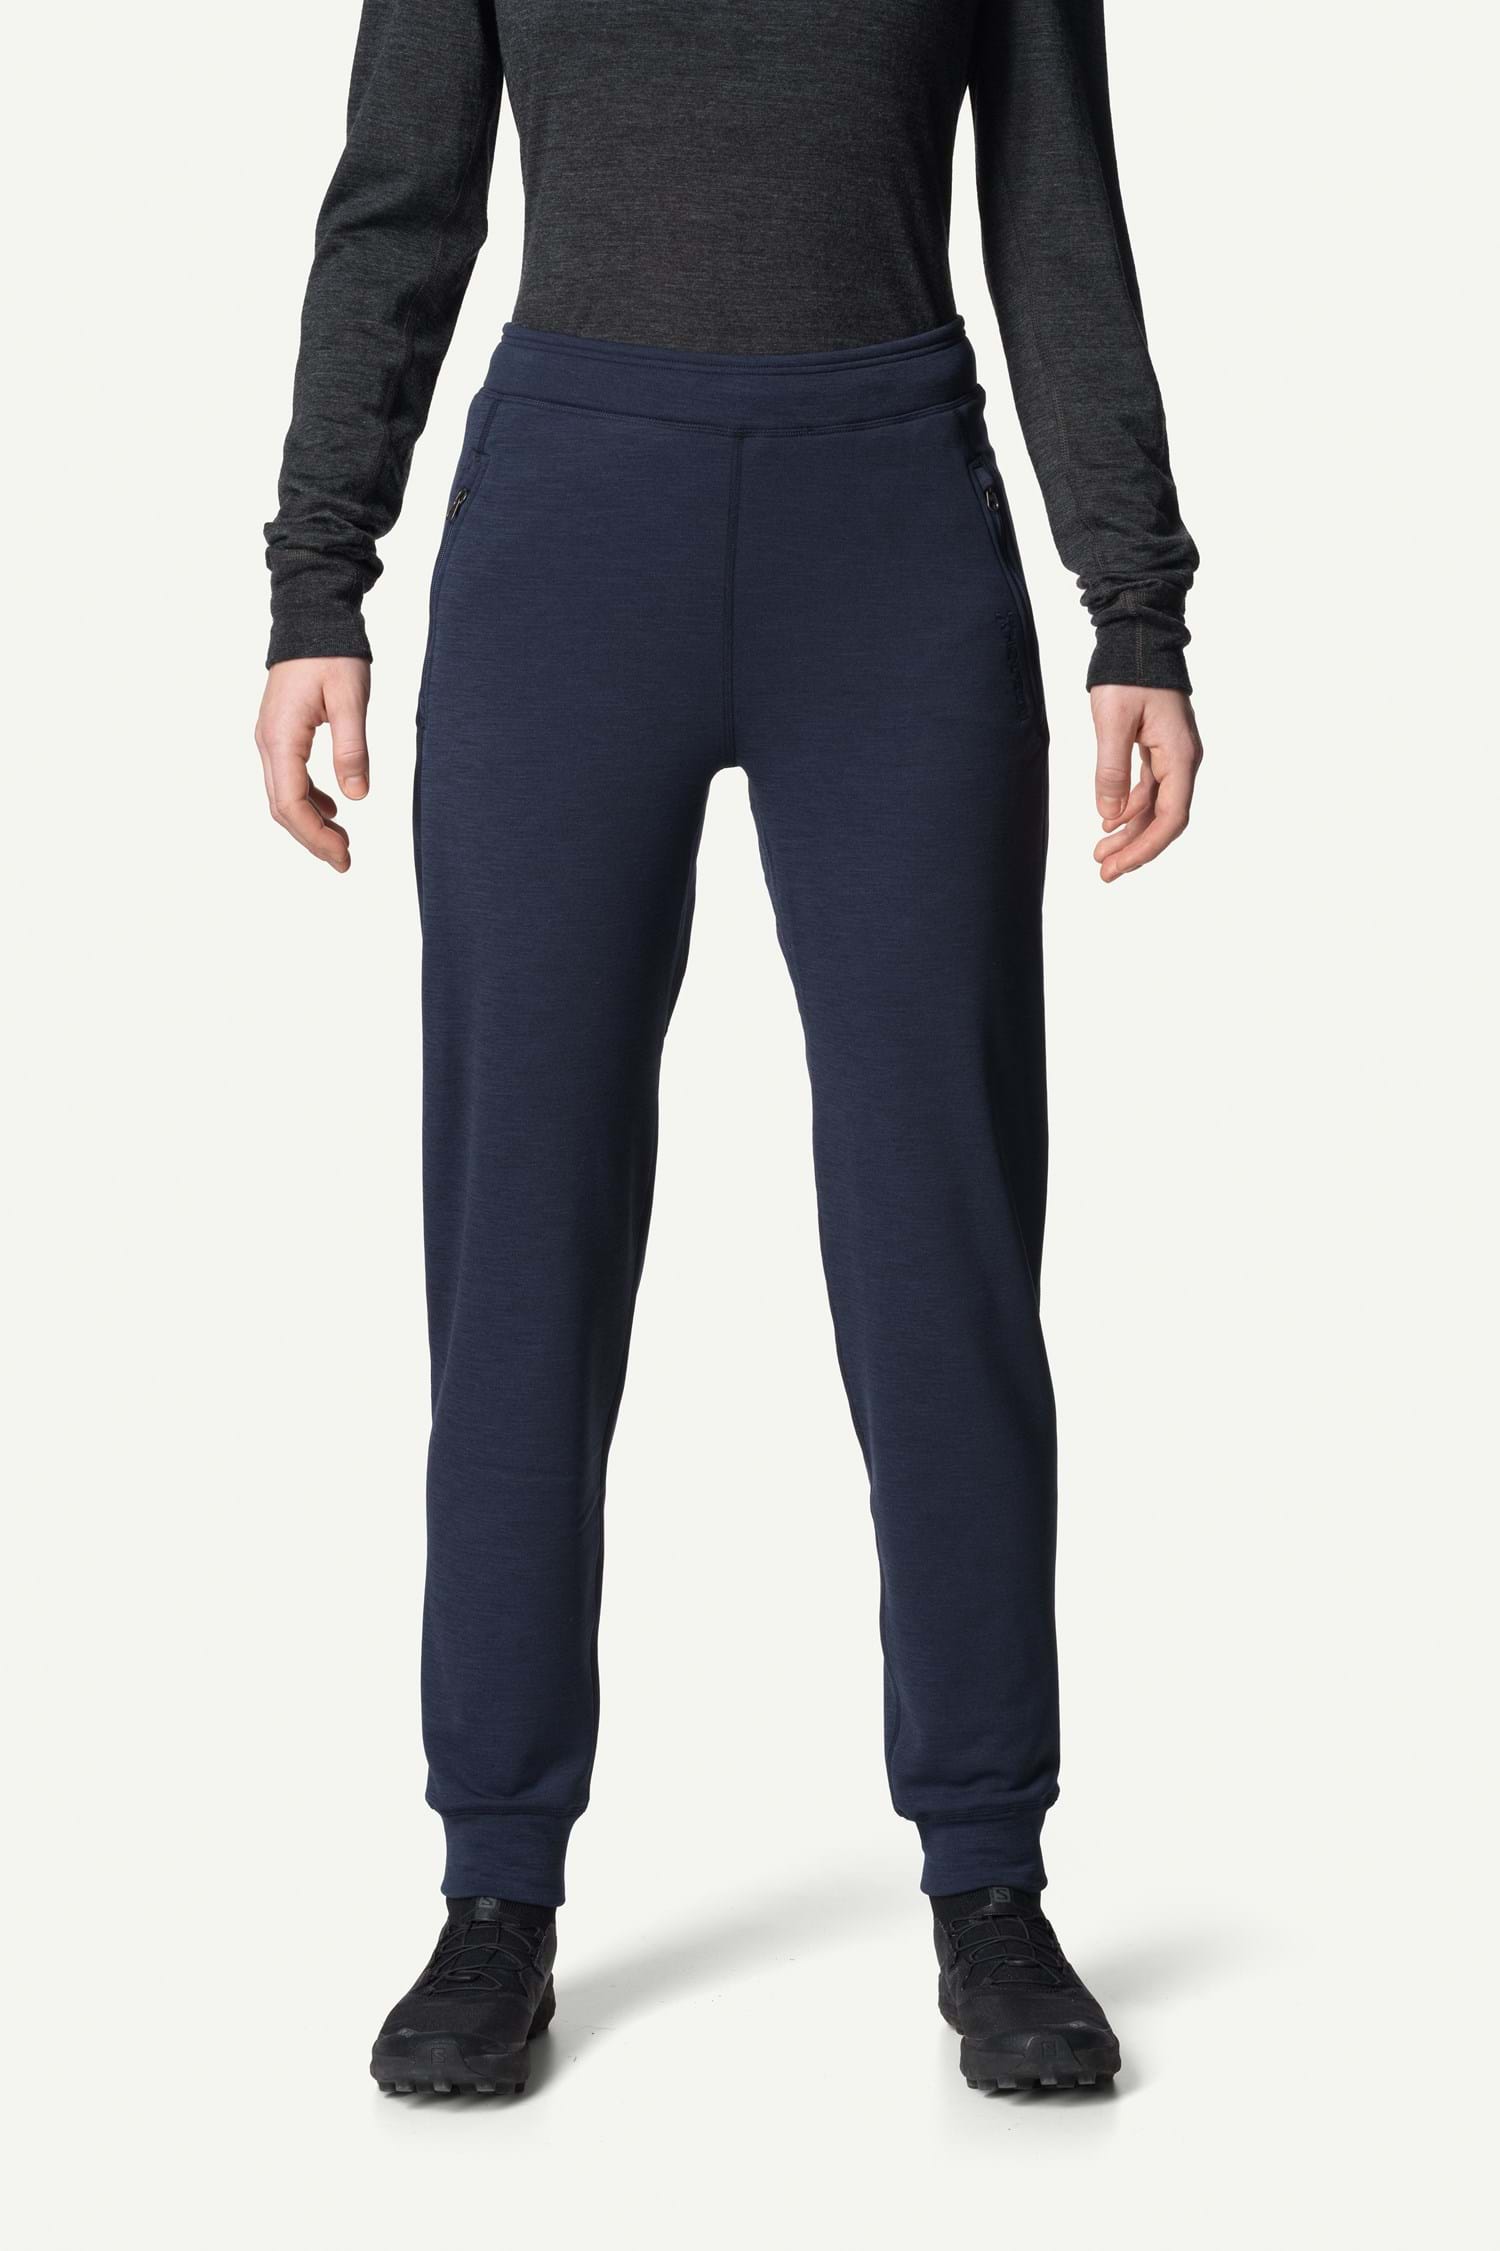 Buy Black Track Pants for Women by Outryt Online